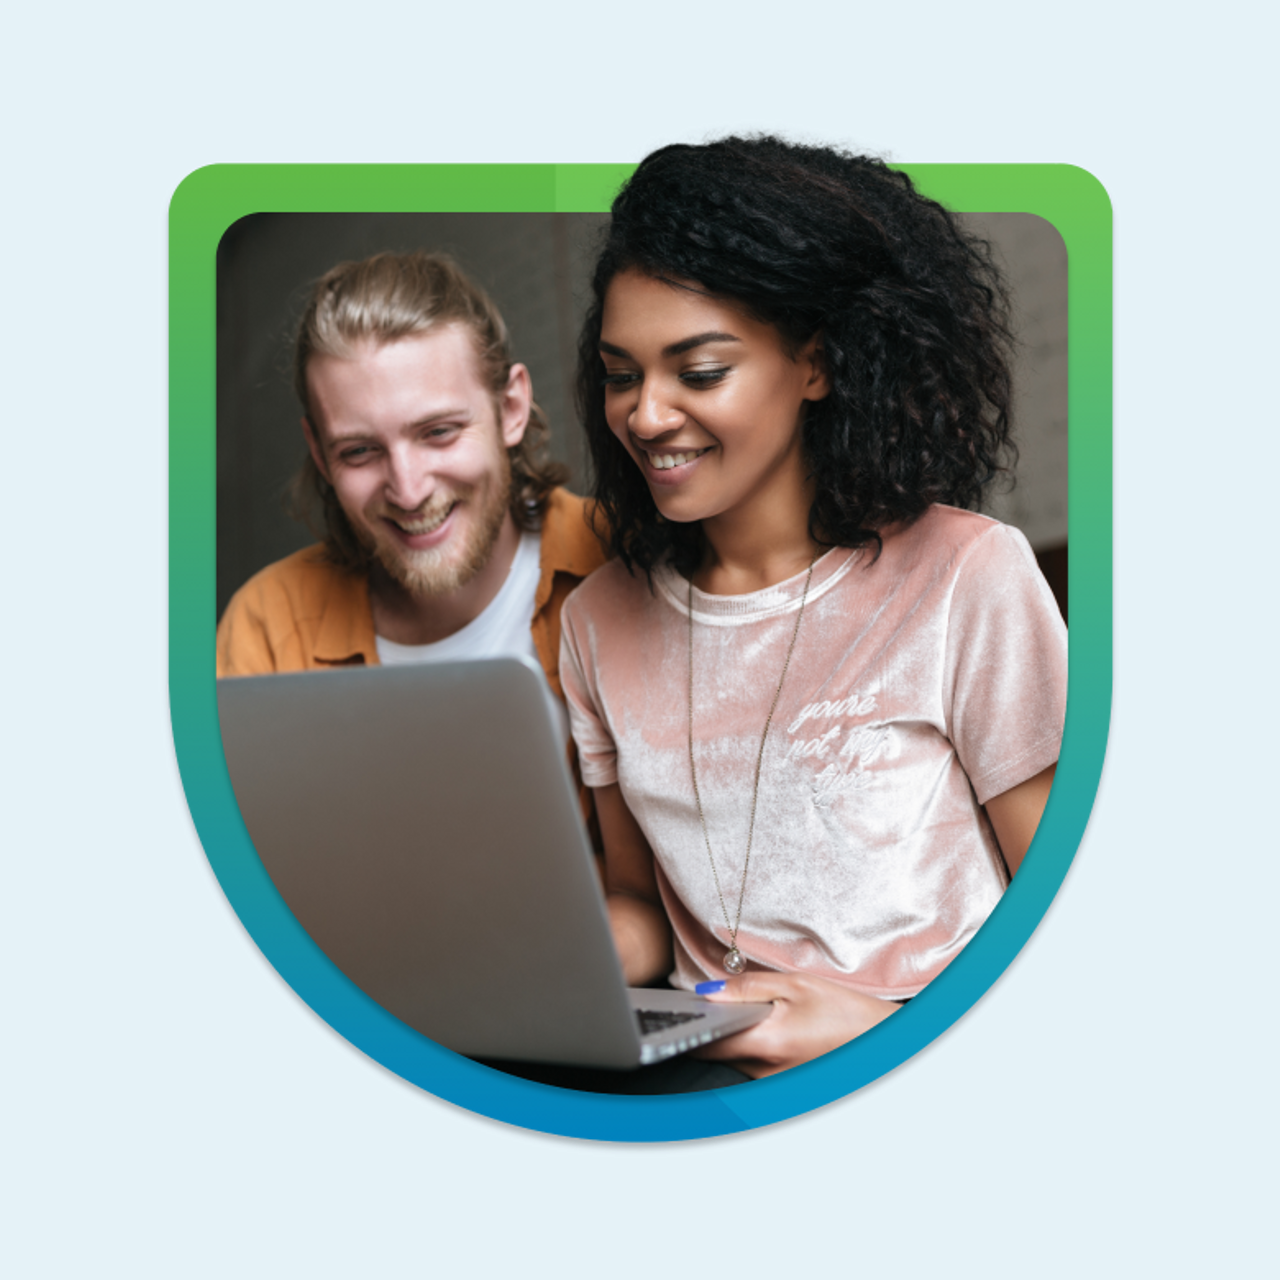 Young man and woman smiling and looking at a laptop within a circular frame with blue and green borders on a blue background.